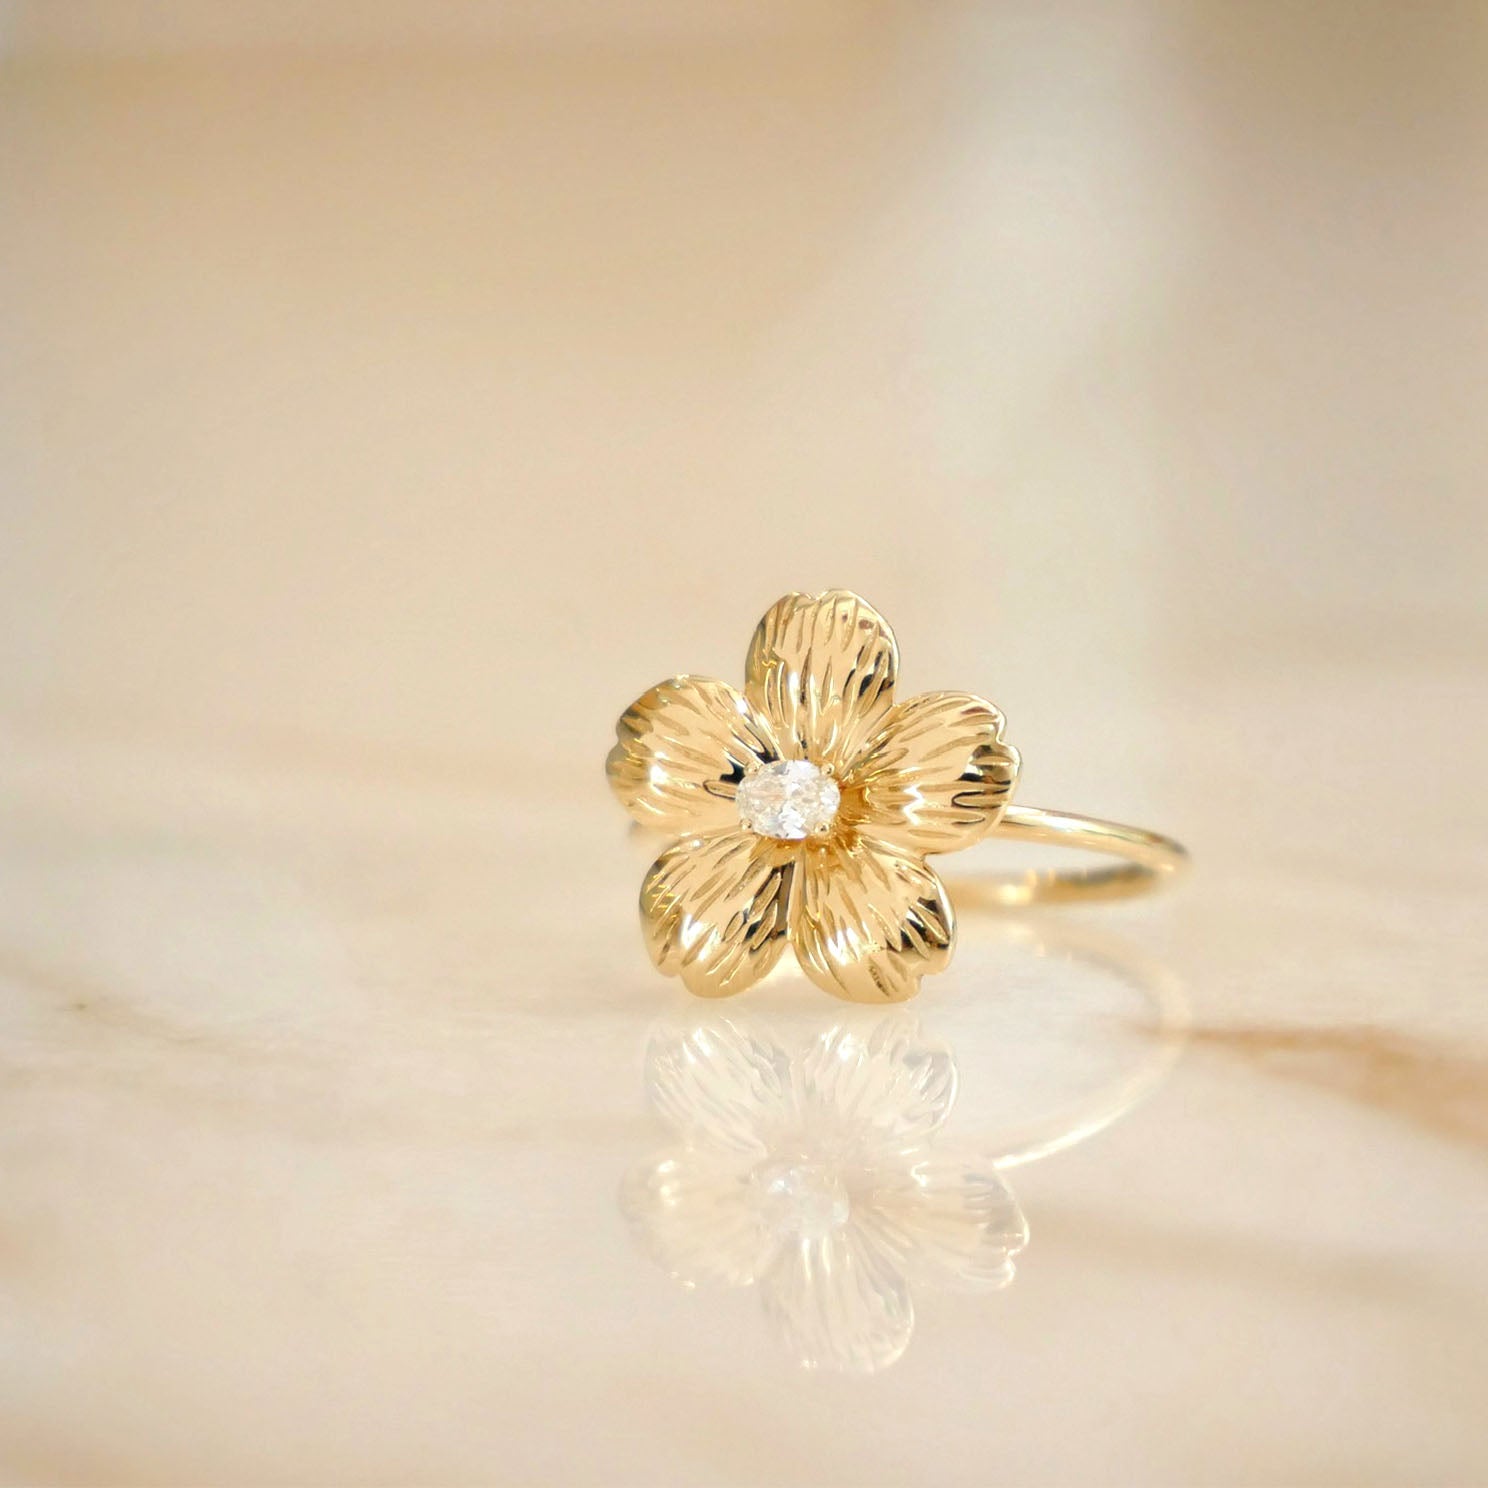 Cherry Blossom Ring in 14k yellow gold